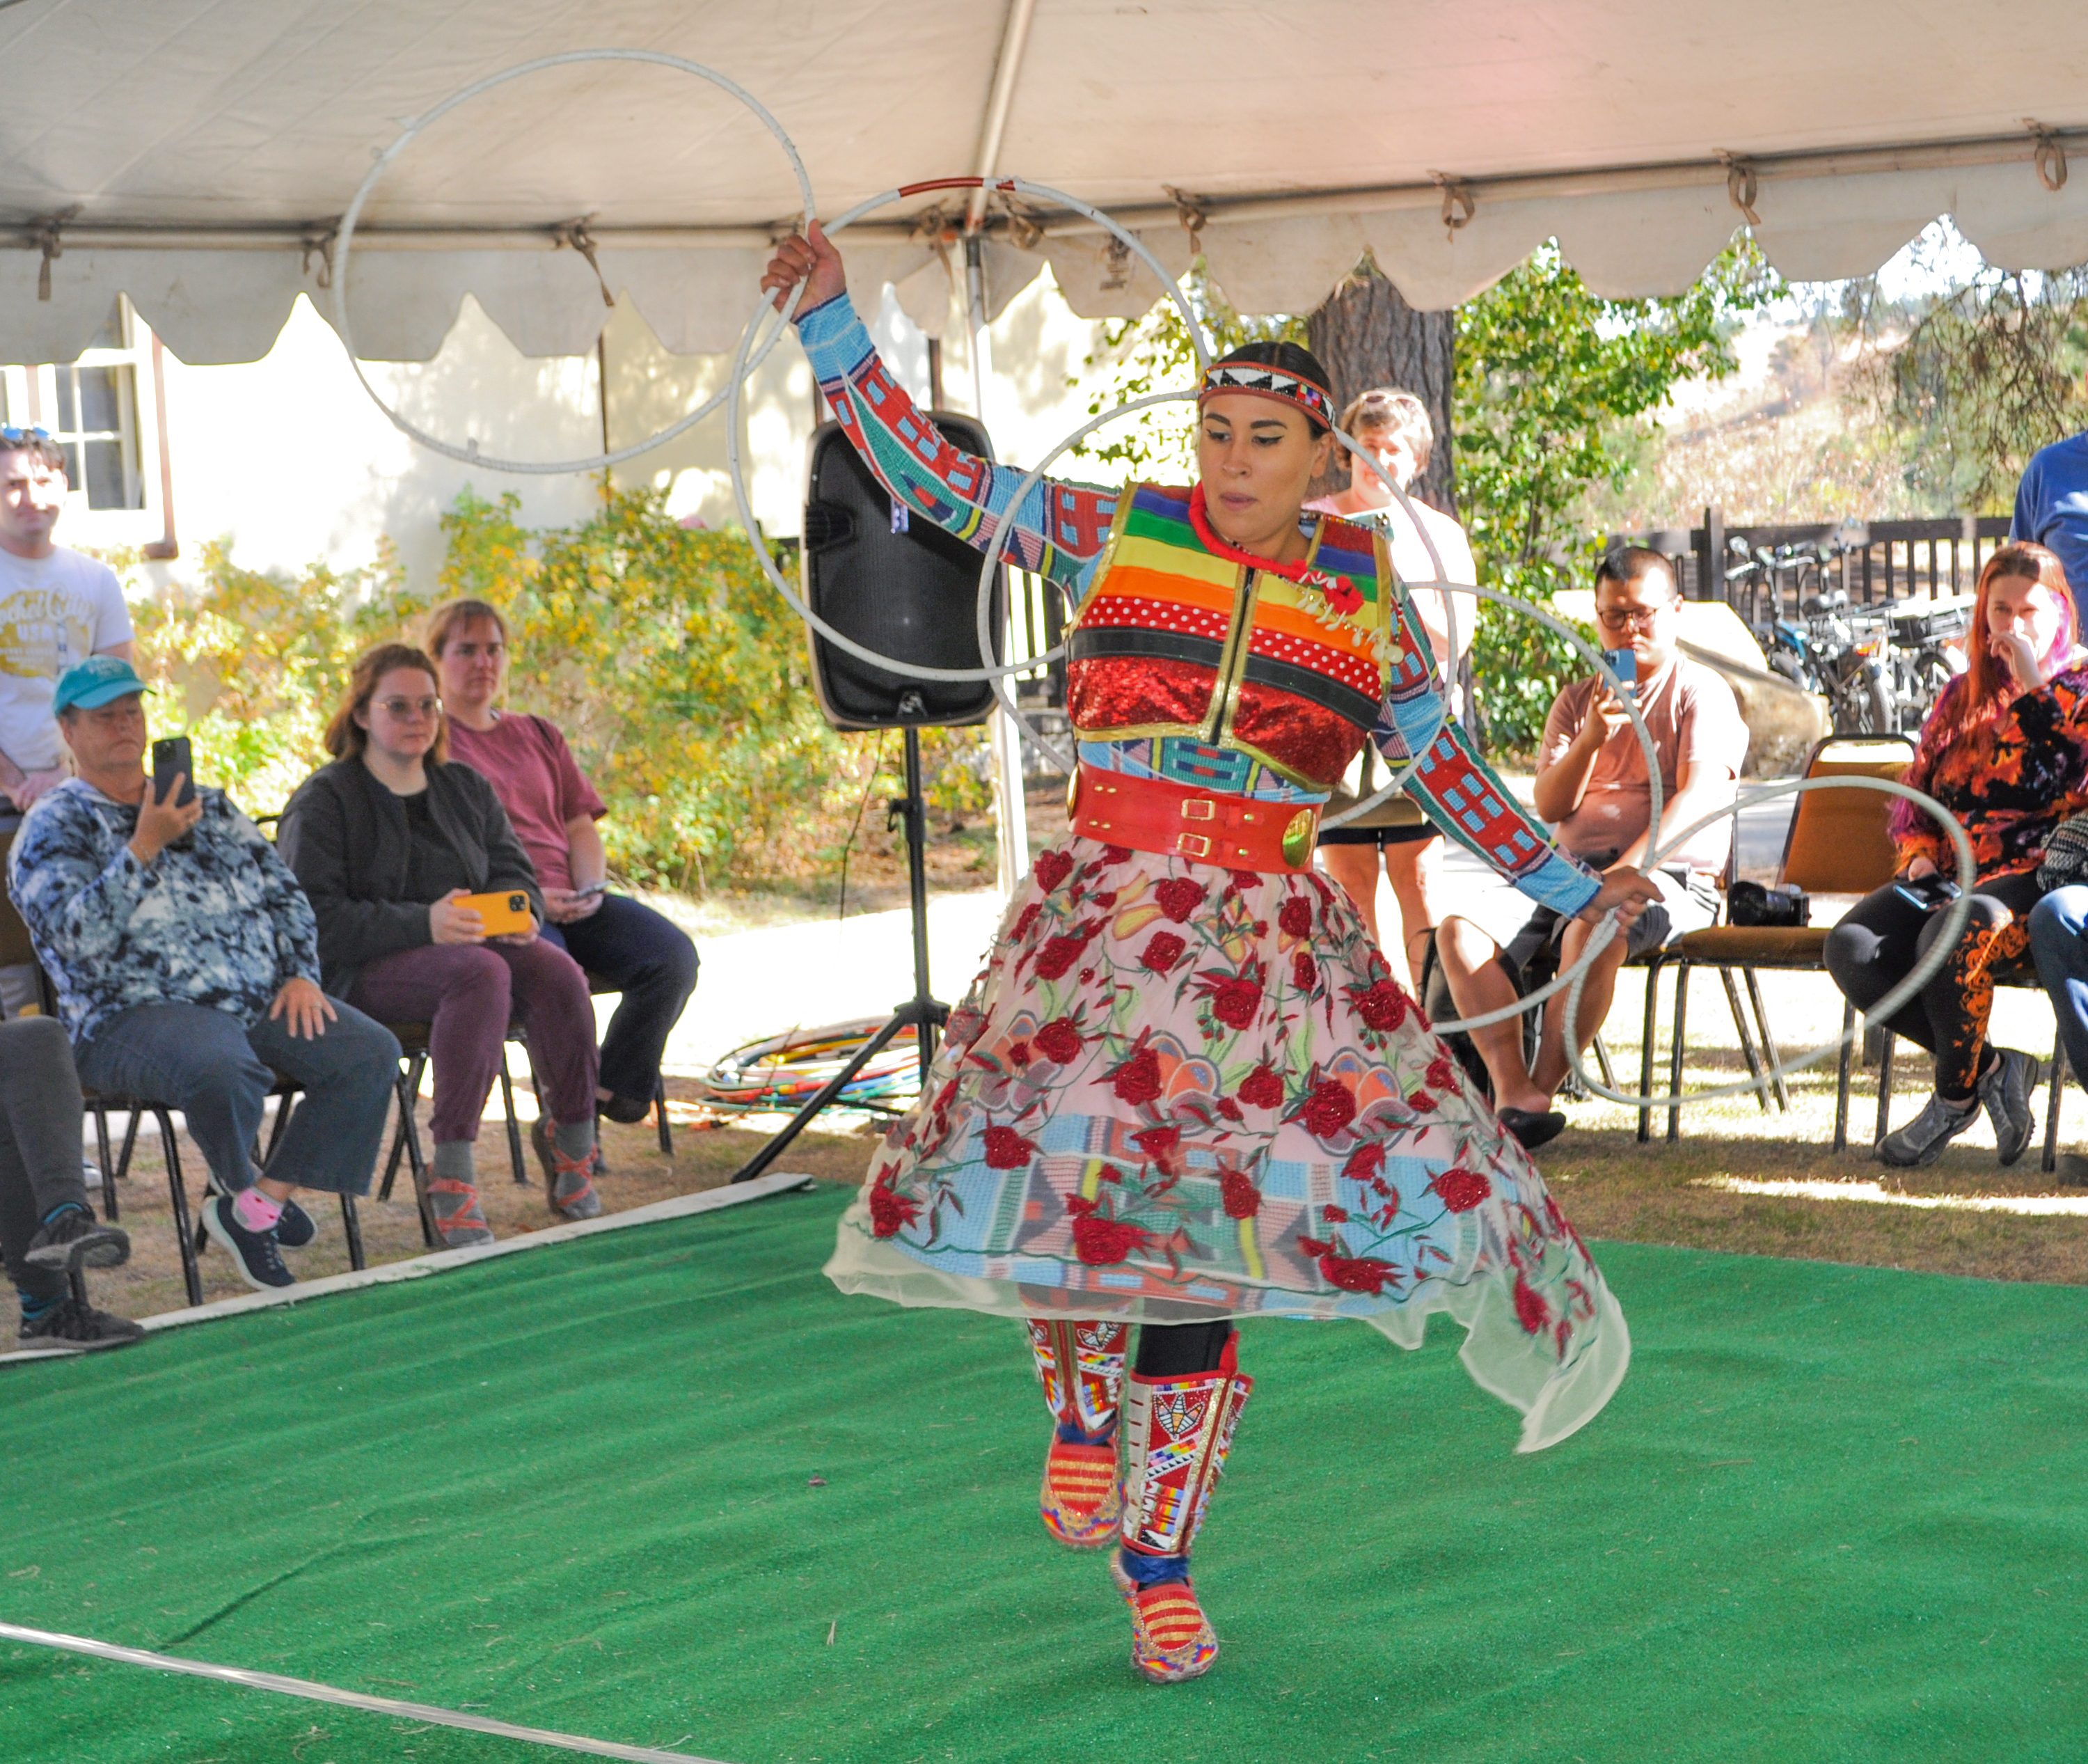 Woman wearing a colorful dress dances on a green carpet with white hoops along her arms and in her hands. People stand and sit along the edges of the carpet watching her